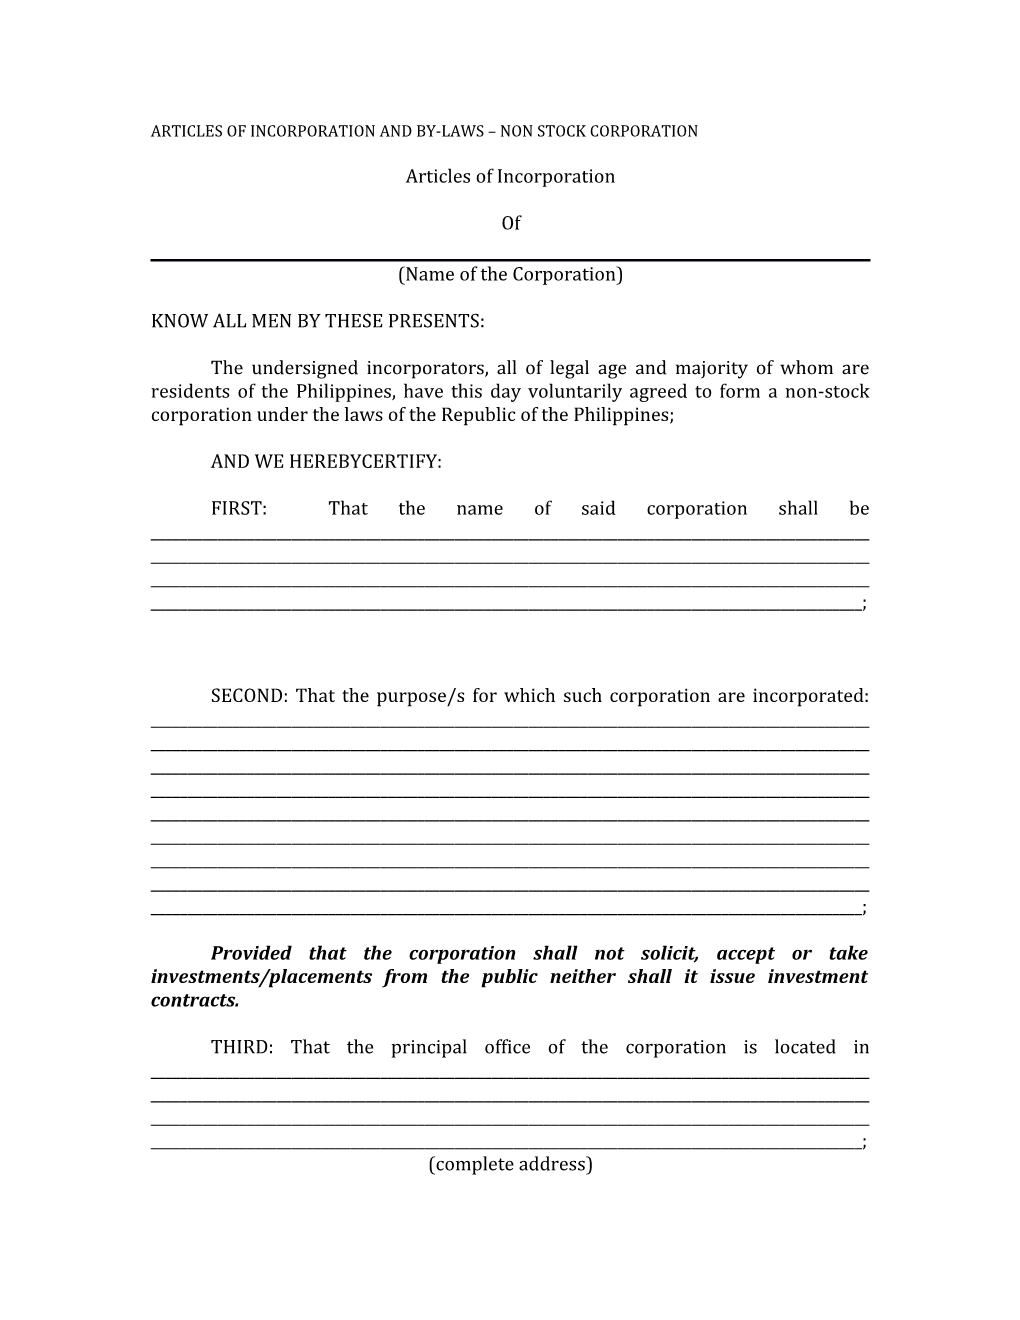 Articles of Incorporation and By-Laws Non Stock Corporation